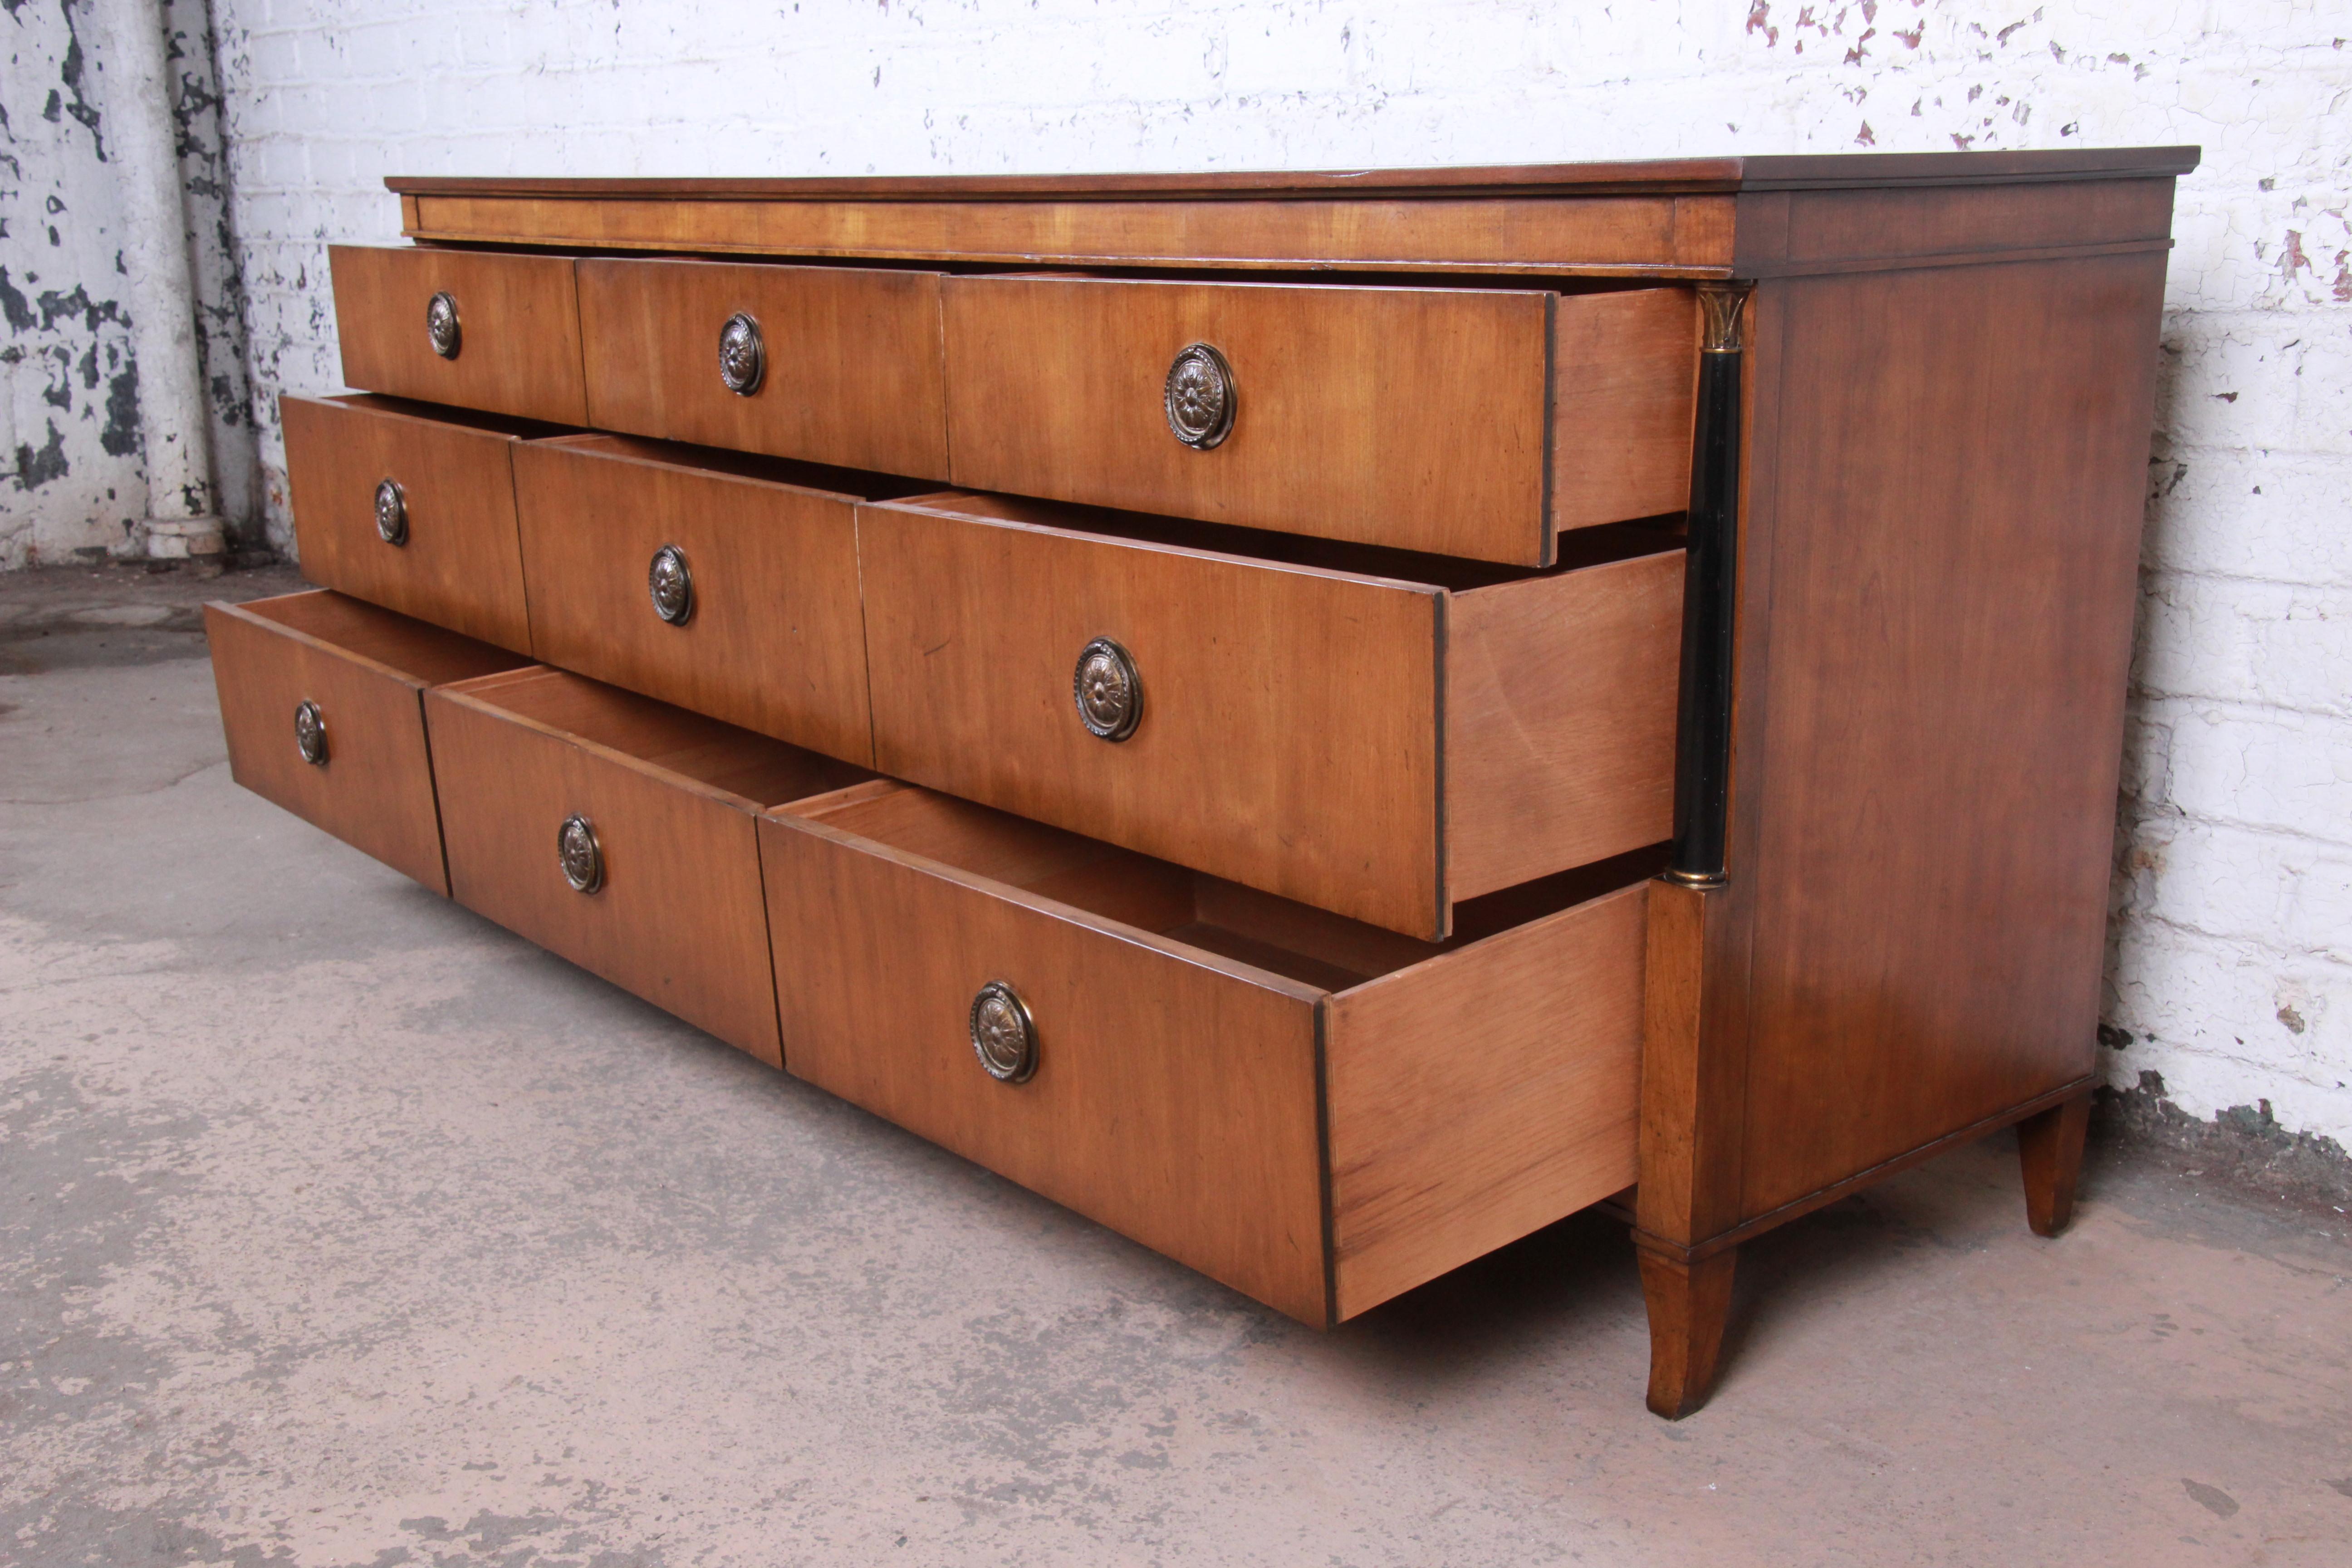 20th Century Baker Furniture French Empire Cherrywood Triple Dresser or Credenza